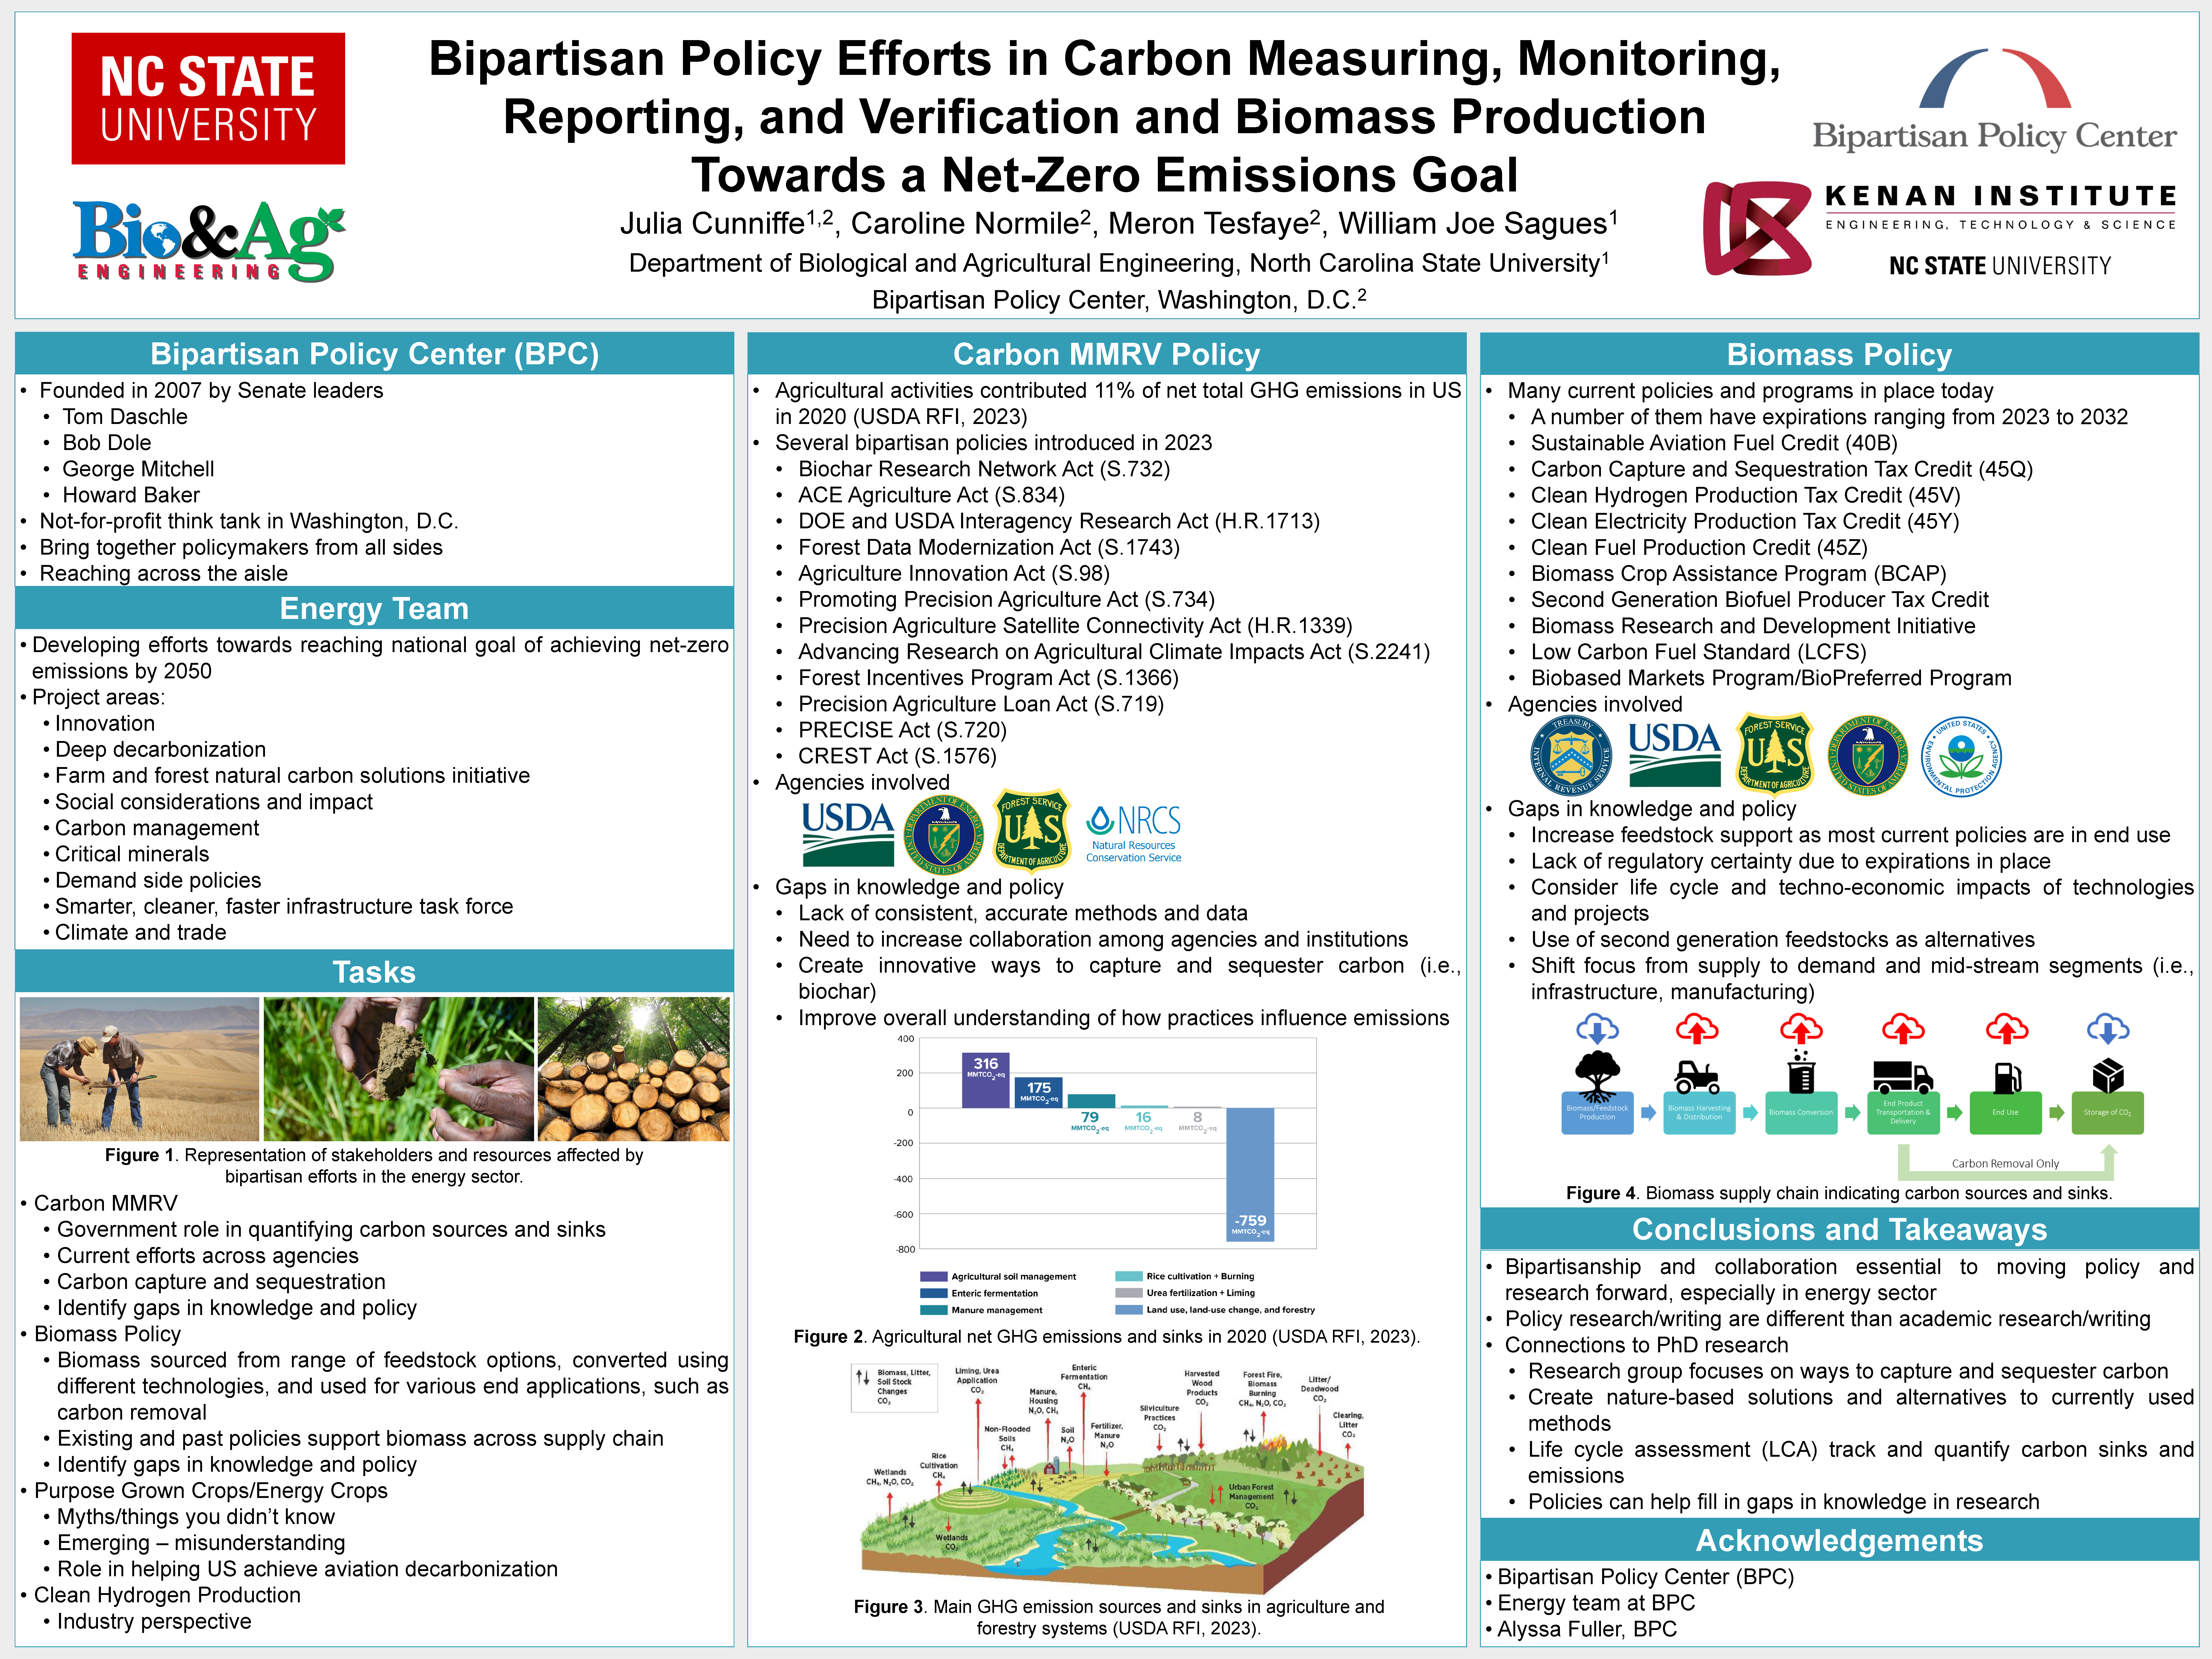 image of Julia Cunniffe's poster, "Bipartisan Policy Efforts in Carbon Measuring, Monitoring, Reporting, and Verification and Biomass Production Towards a Net-Zero Emissions Goal"